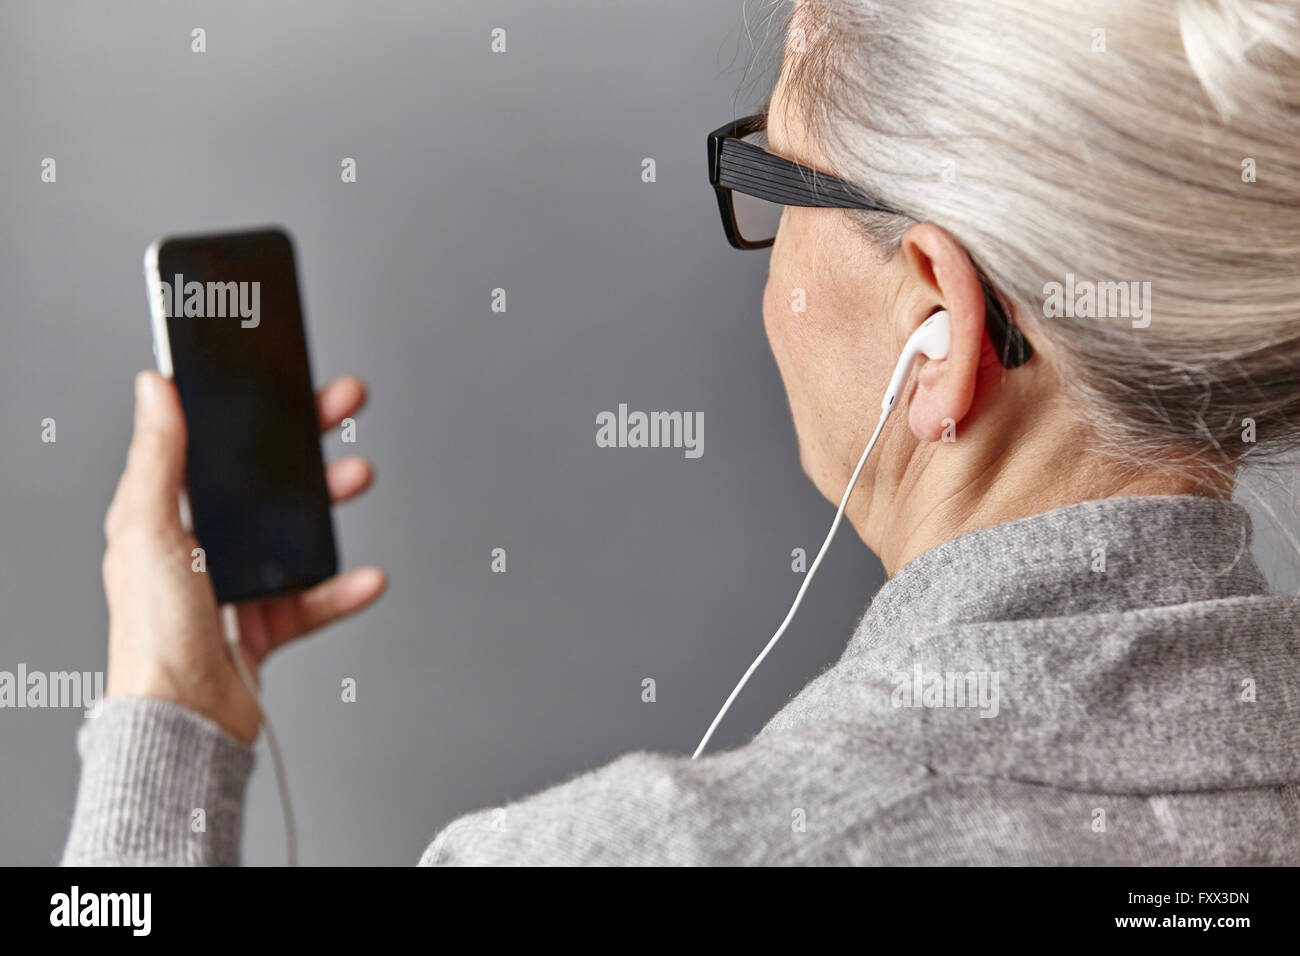 Over shoulder view of gray haired woman wearing ear buds holding smartphone Stock Photo